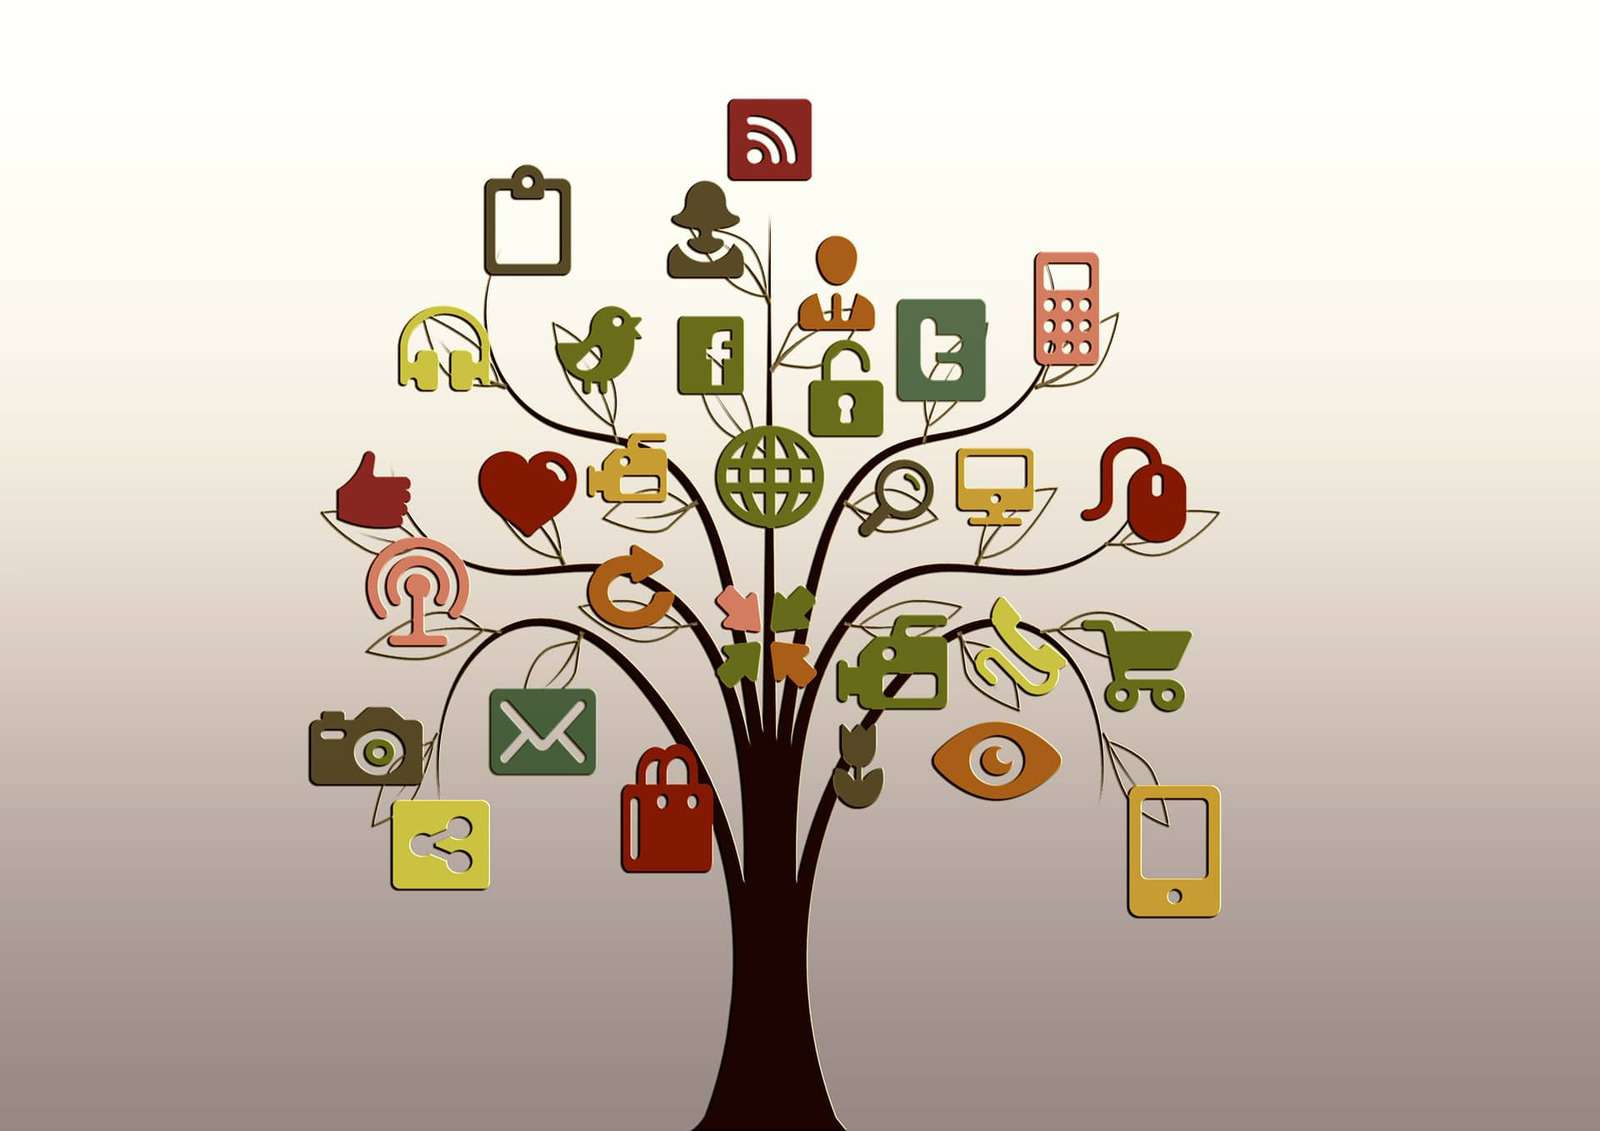 A tree adorned with various social icons, appealing to indie creators.